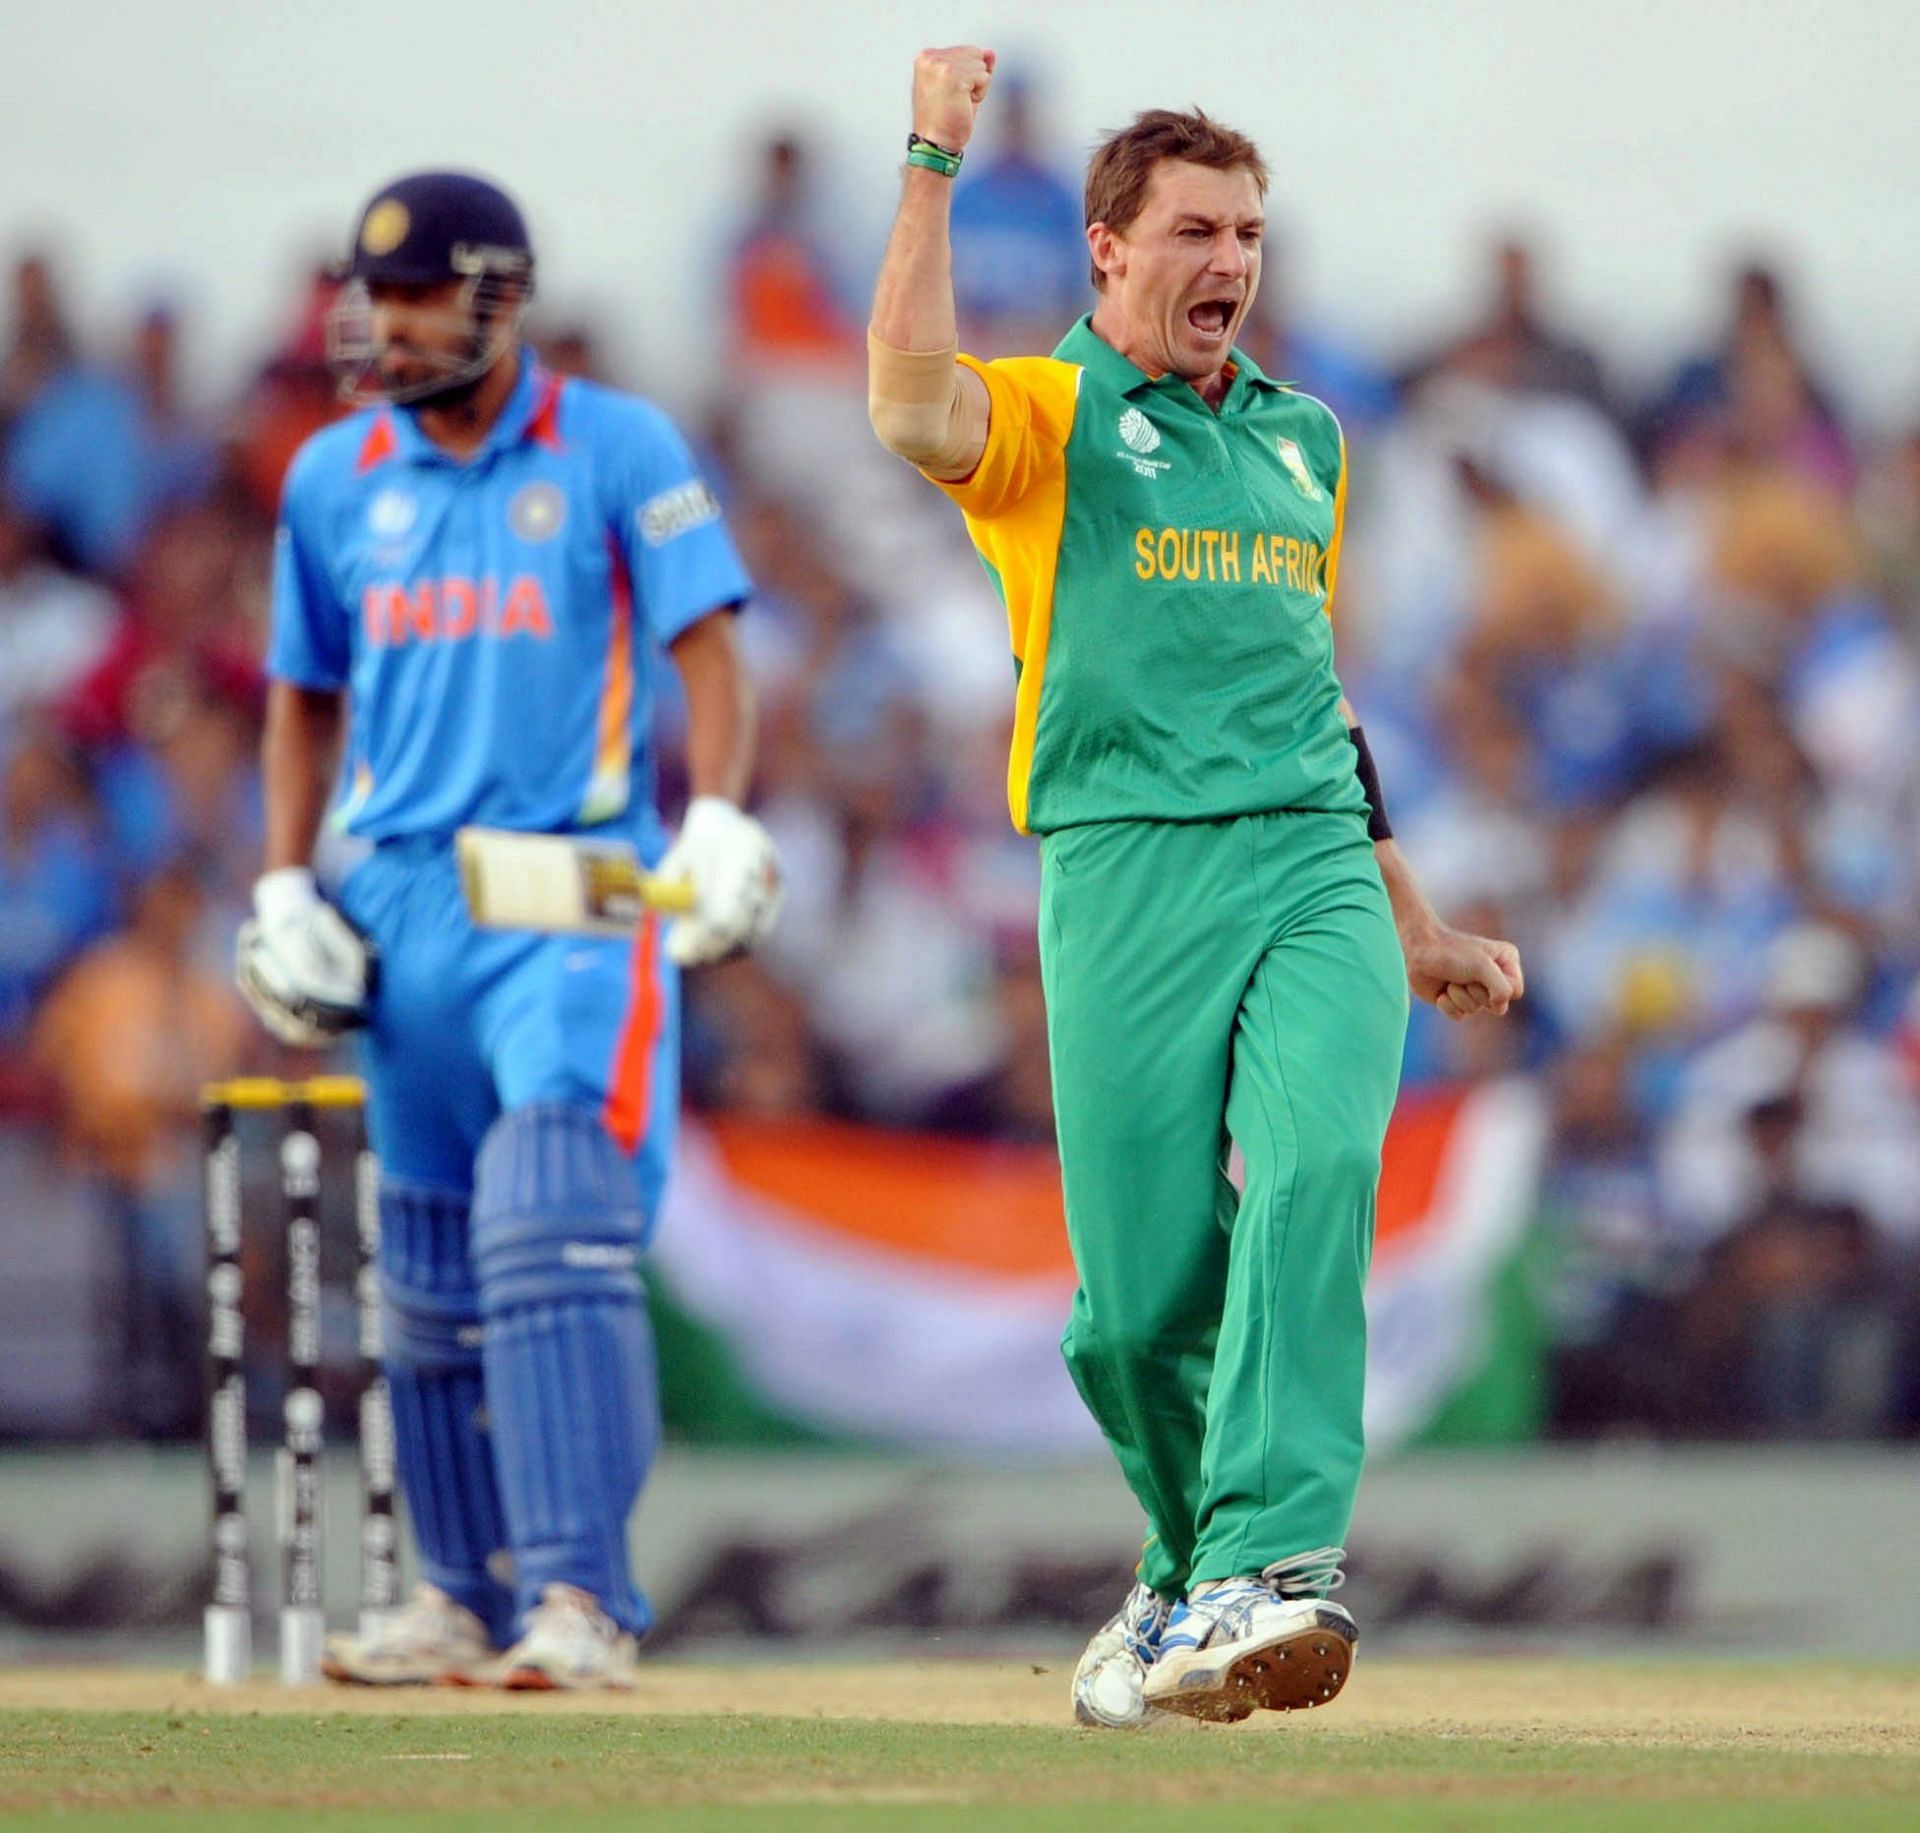 Dale Steyn during the India v South Africa:2011 ICC World Cup Match [Getty Images]